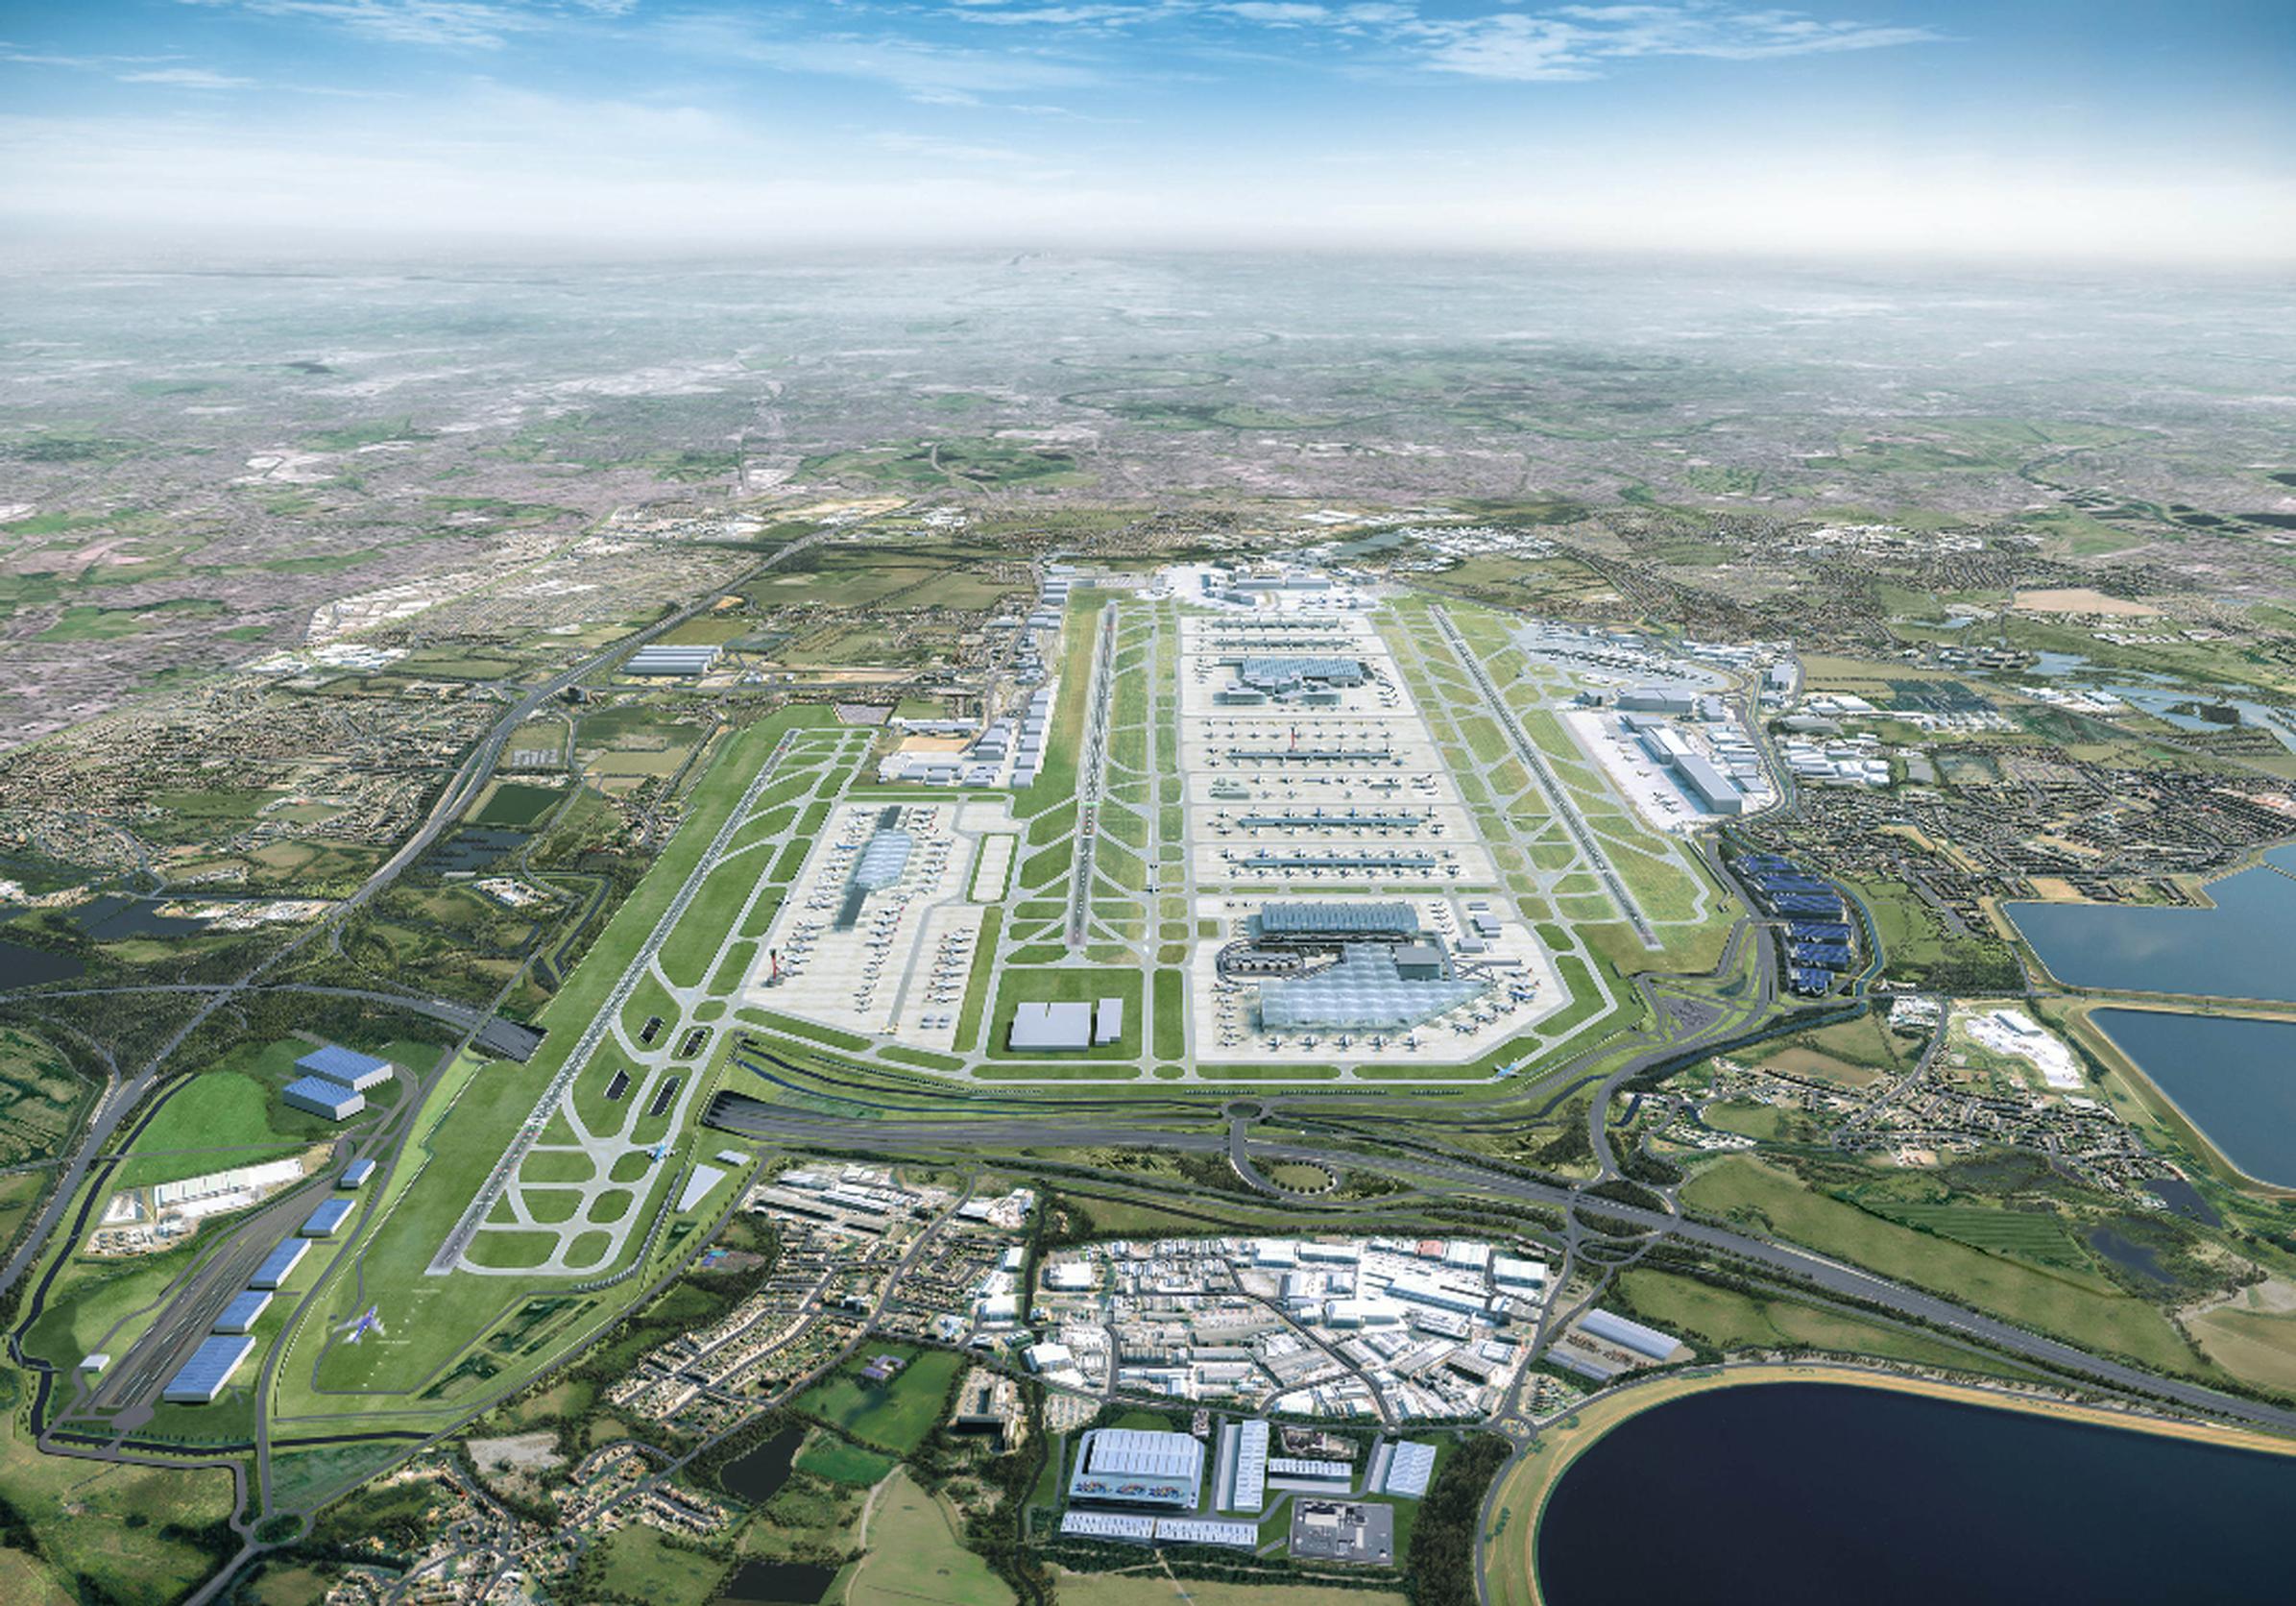 How the expanded Heathrow Airport could look (Heathrow Airport)